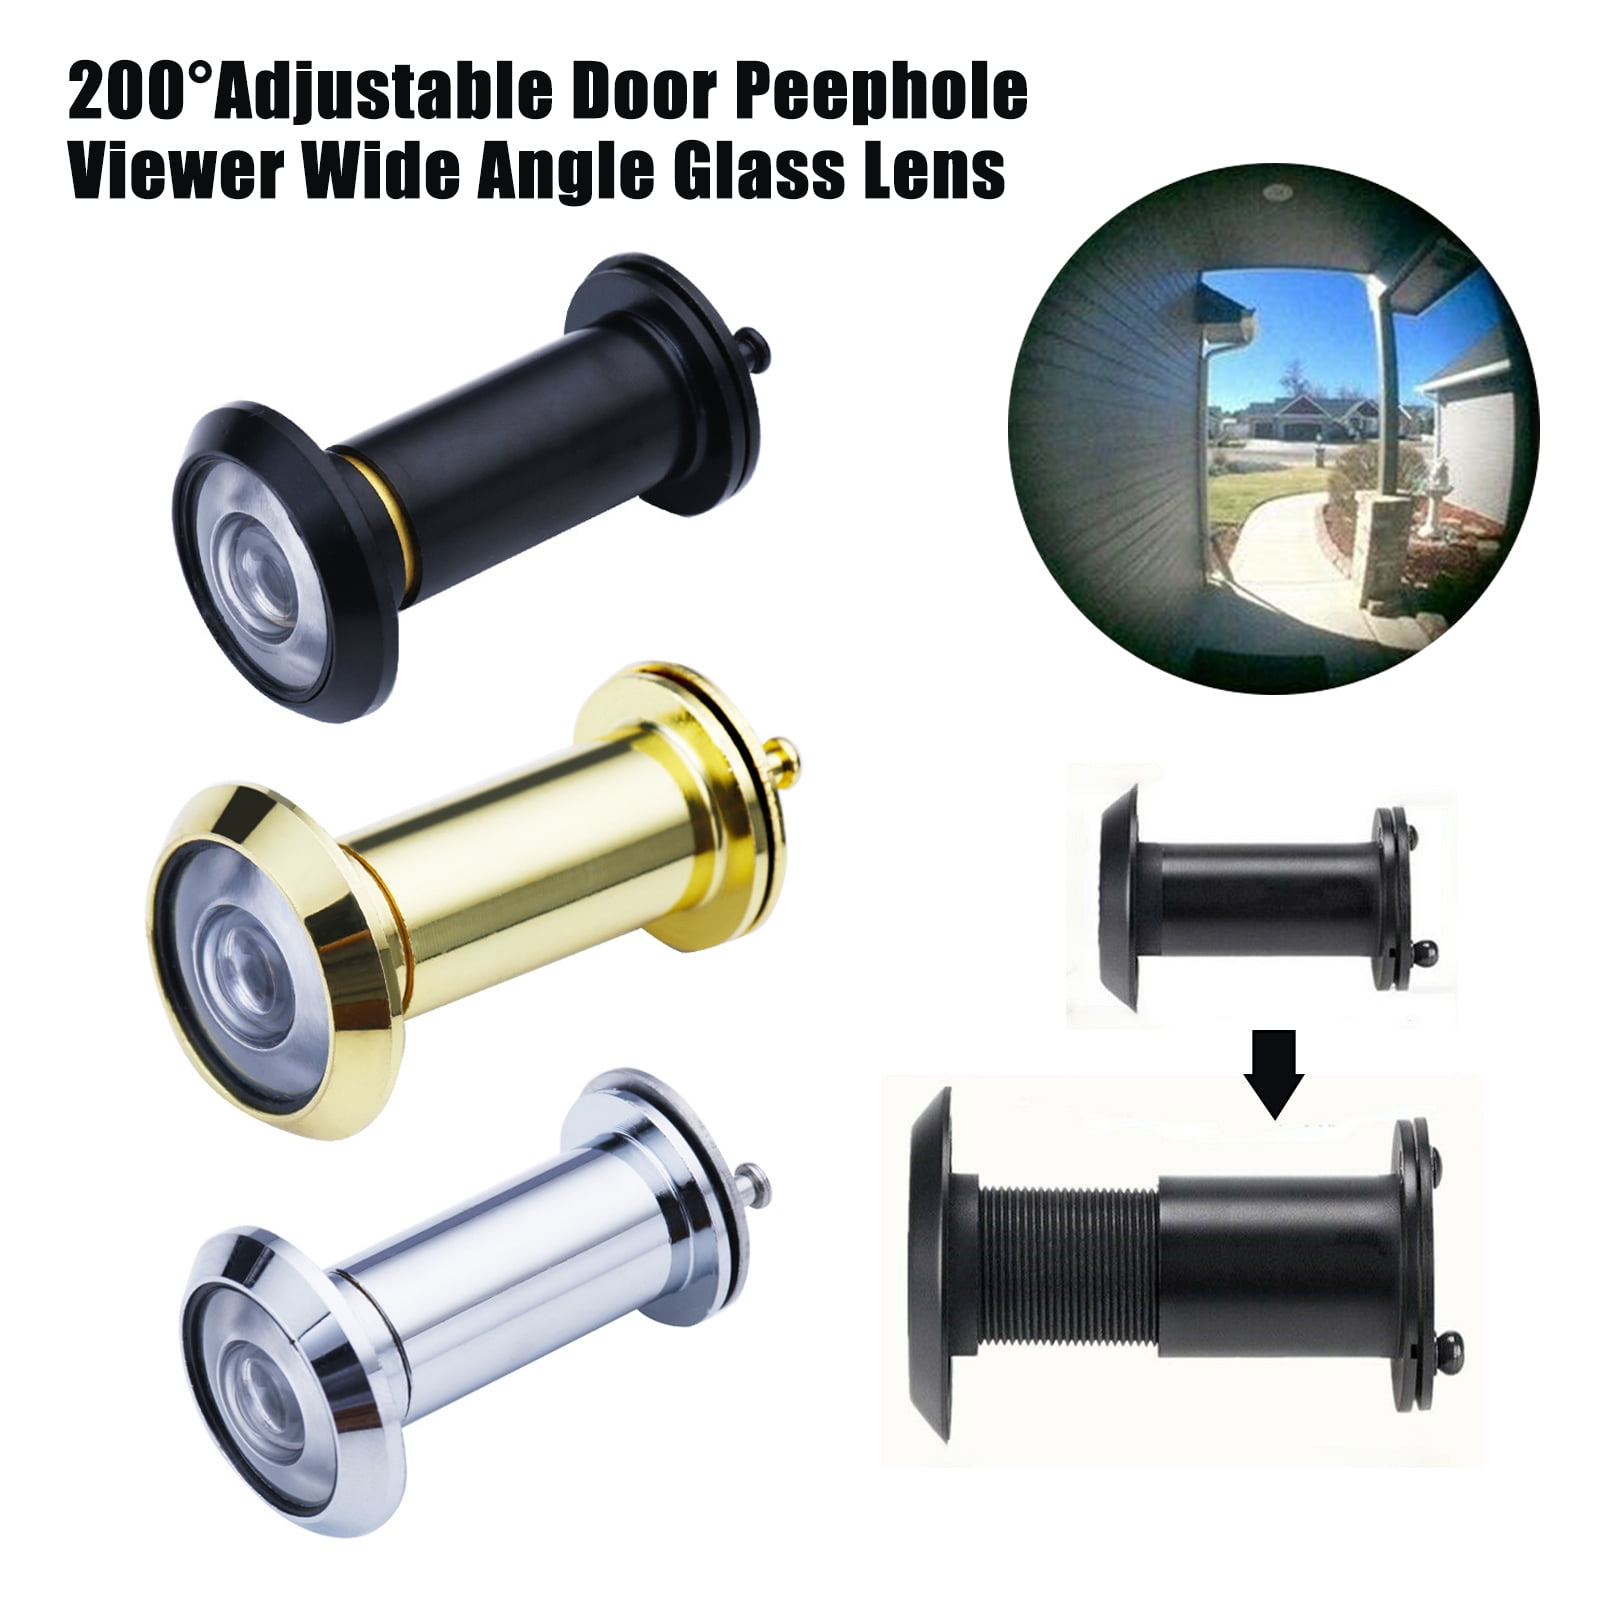 Security Door Viewer Peephole for Front Door w/Privacy Cover Optical Glass Lens 